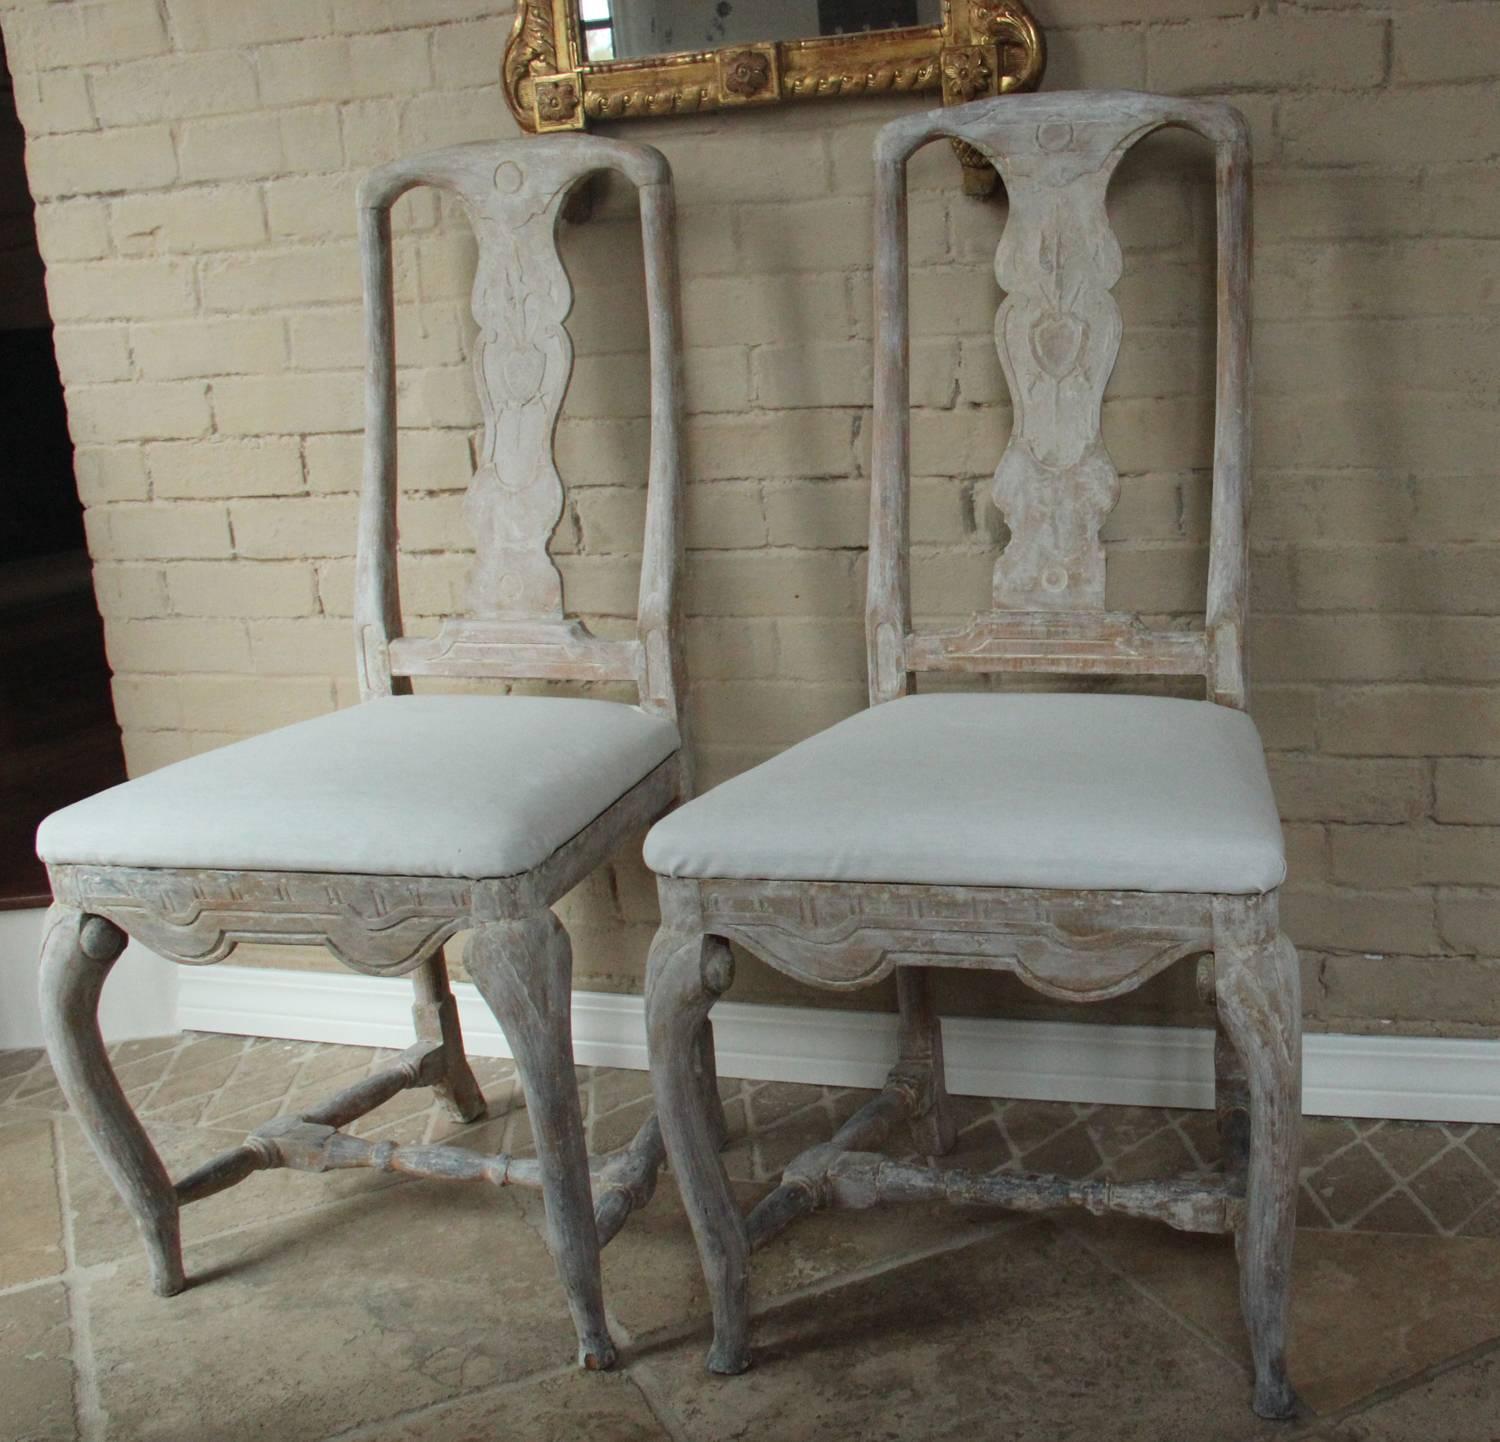 A stunning pair of 18th century, Swedish dining chairs from the Rococo period with splat backs carved with a family crest, carved and shaped seat rail, refined cabriole legs, H-shaped stretcher and slip seats. Beautifully proportioned and hand